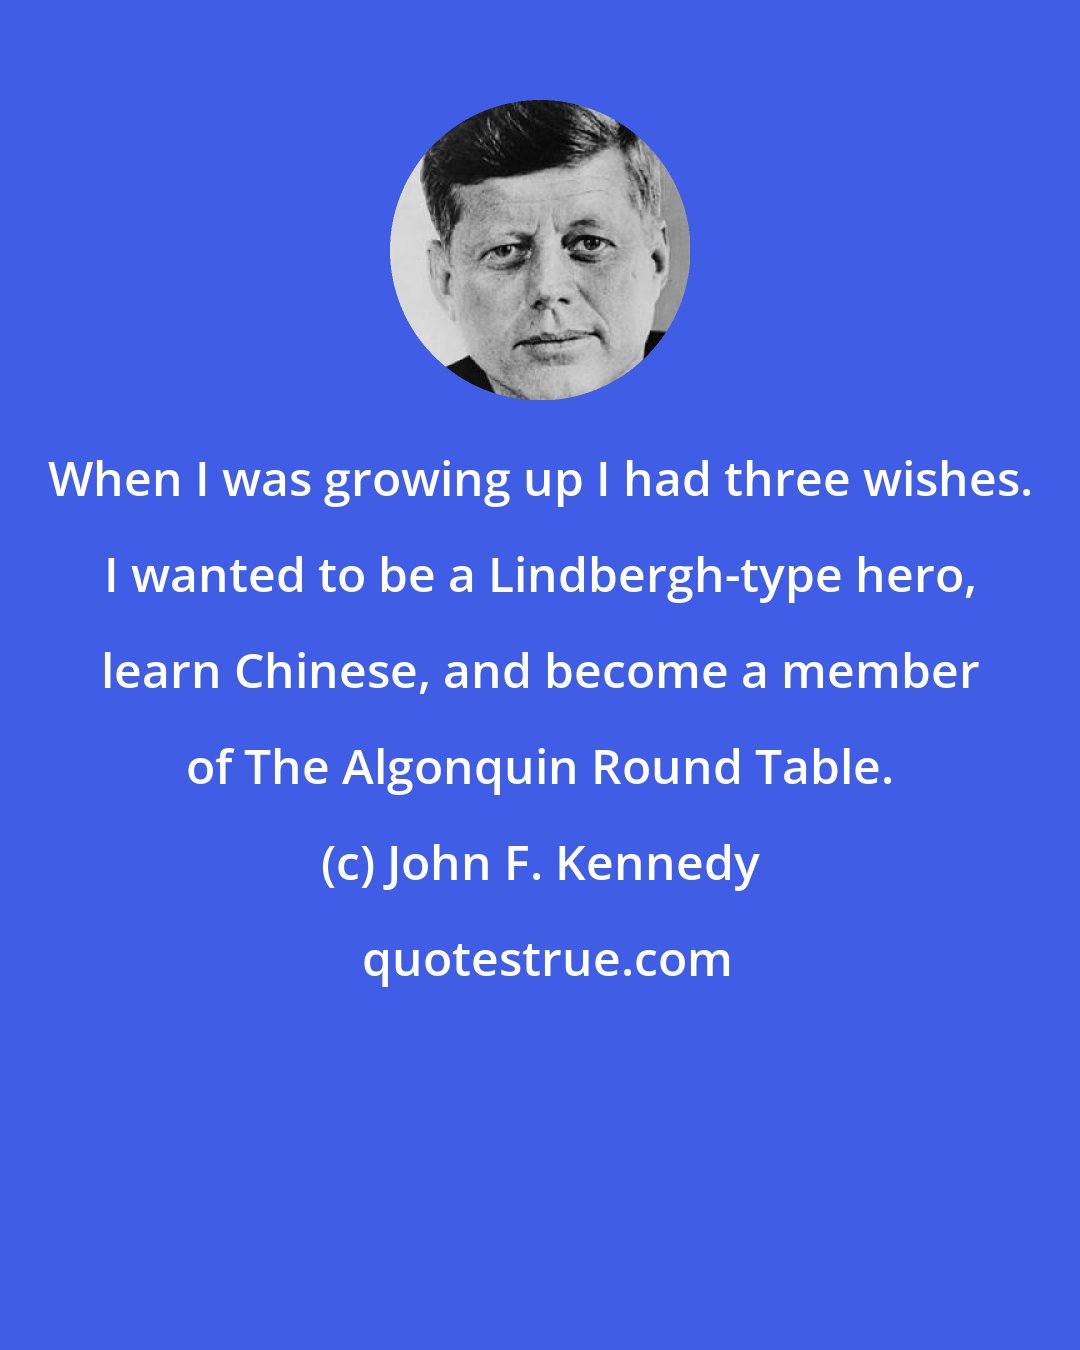 John F. Kennedy: When I was growing up I had three wishes. I wanted to be a Lindbergh-type hero, learn Chinese, and become a member of The Algonquin Round Table.